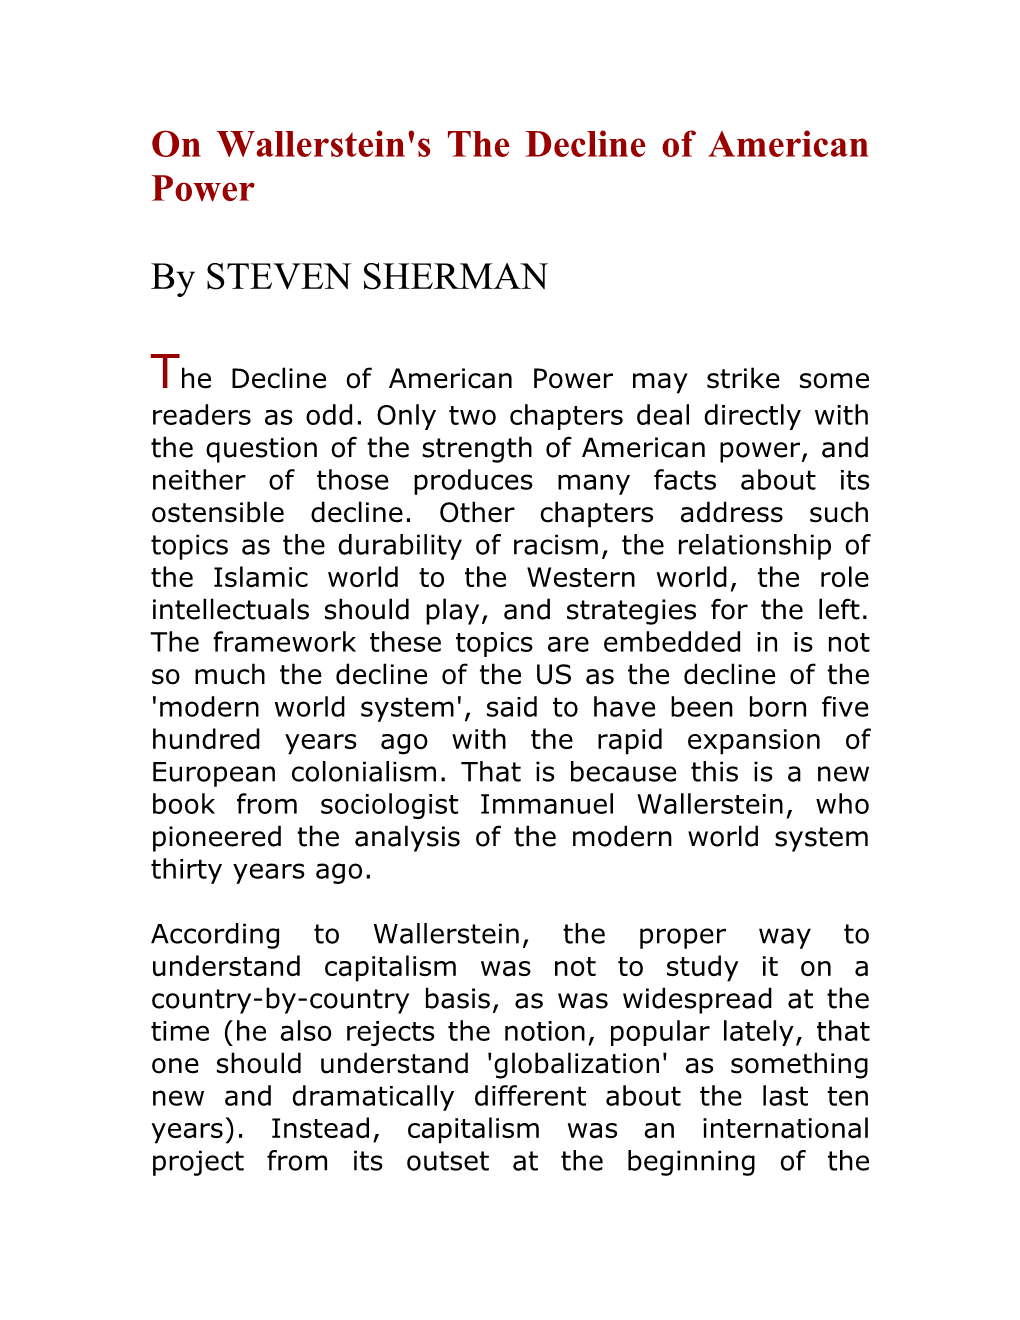 On Wallerstein's the Decline of American Power